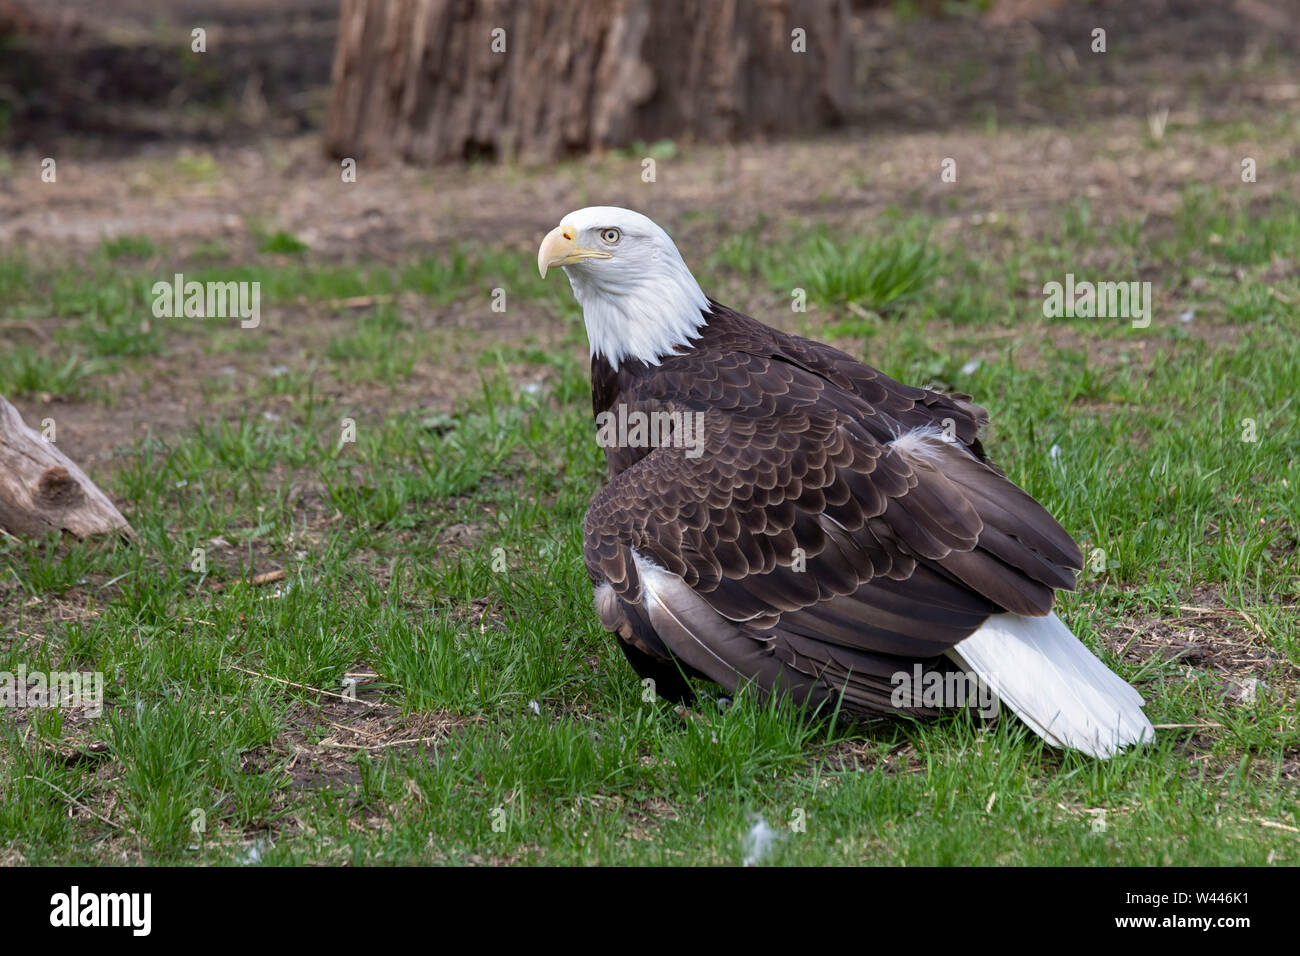 Detroit, Michigan - A bald eagle (Haliaeetus leucocephalus) at the Detroit Zoo. The eagle was brought to the zoo after it was found with a severe wing Stock Photo